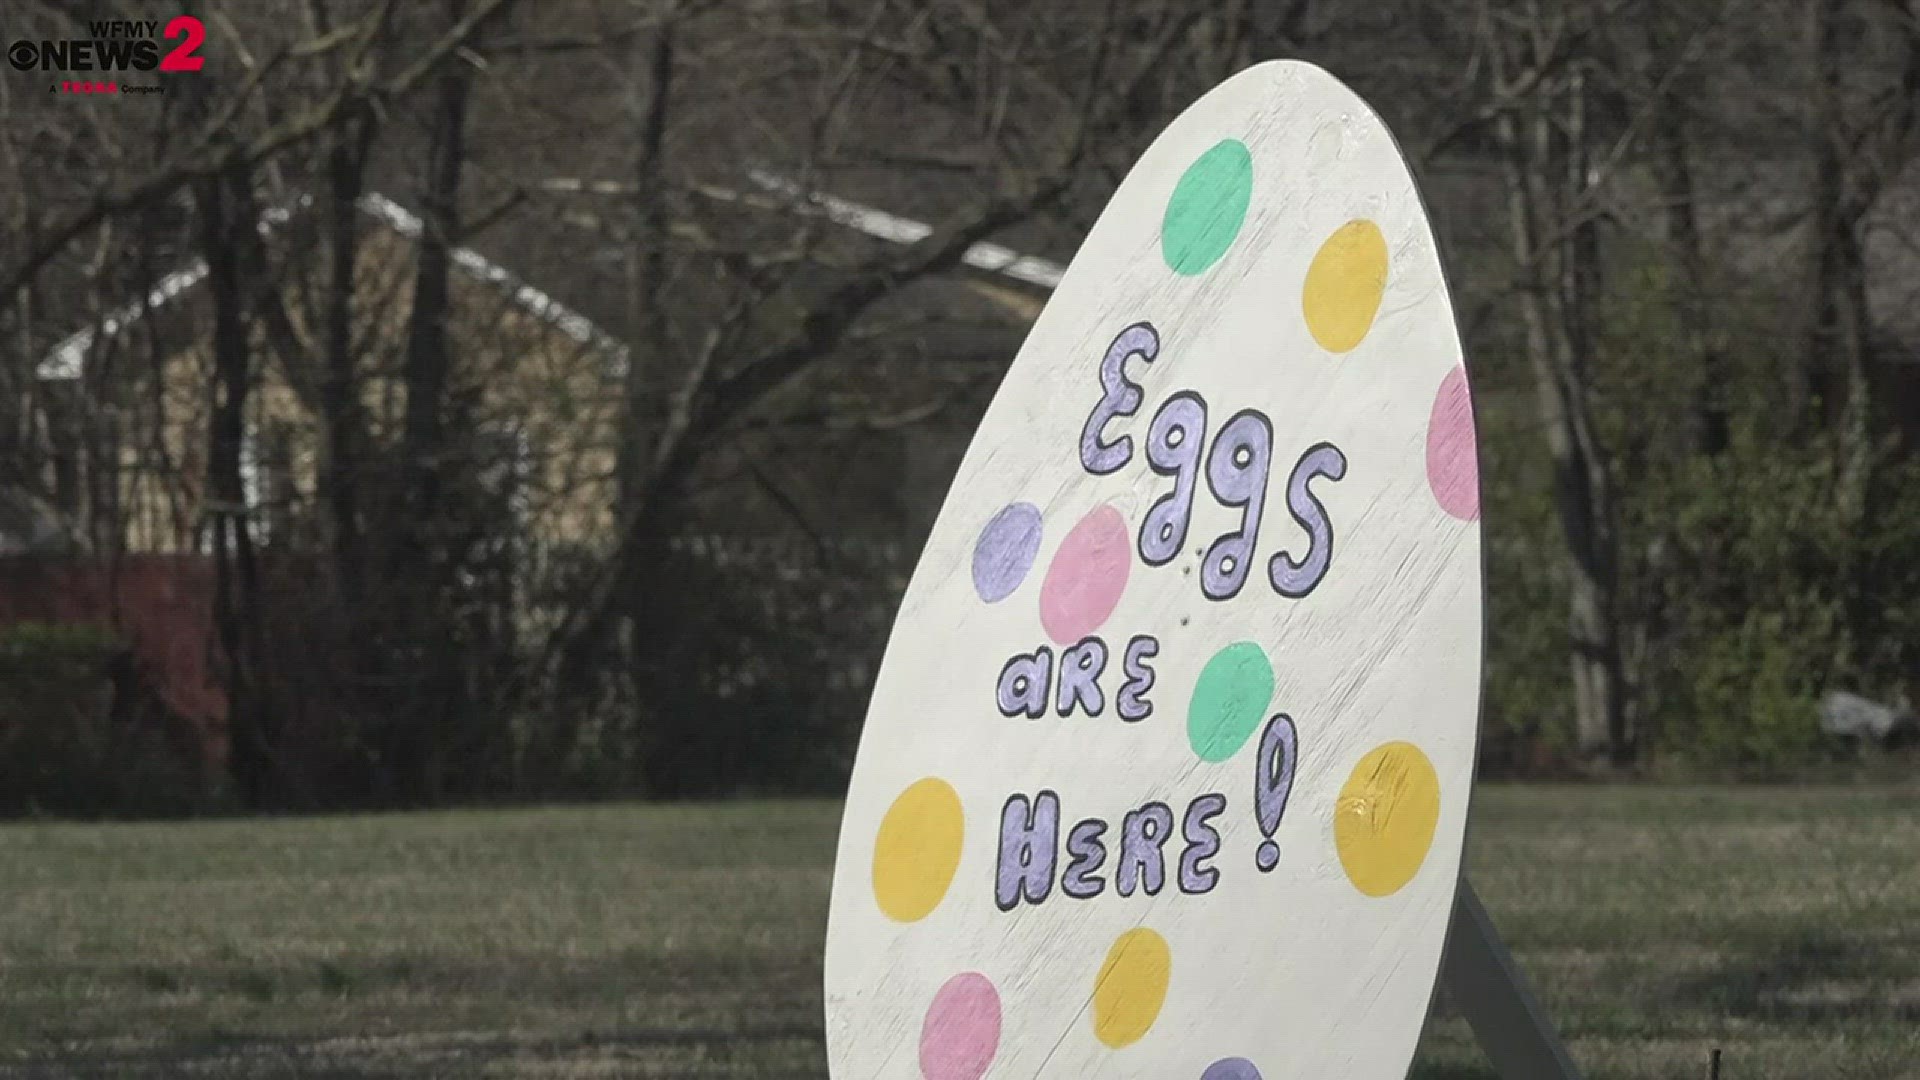 First Presbyterian Church Of Kernersville, also known as the "Egg Church," is selling their homemade chocolate-dipped peanut butter and coconut eggs again! This is the church's largest fundraiser of the year.